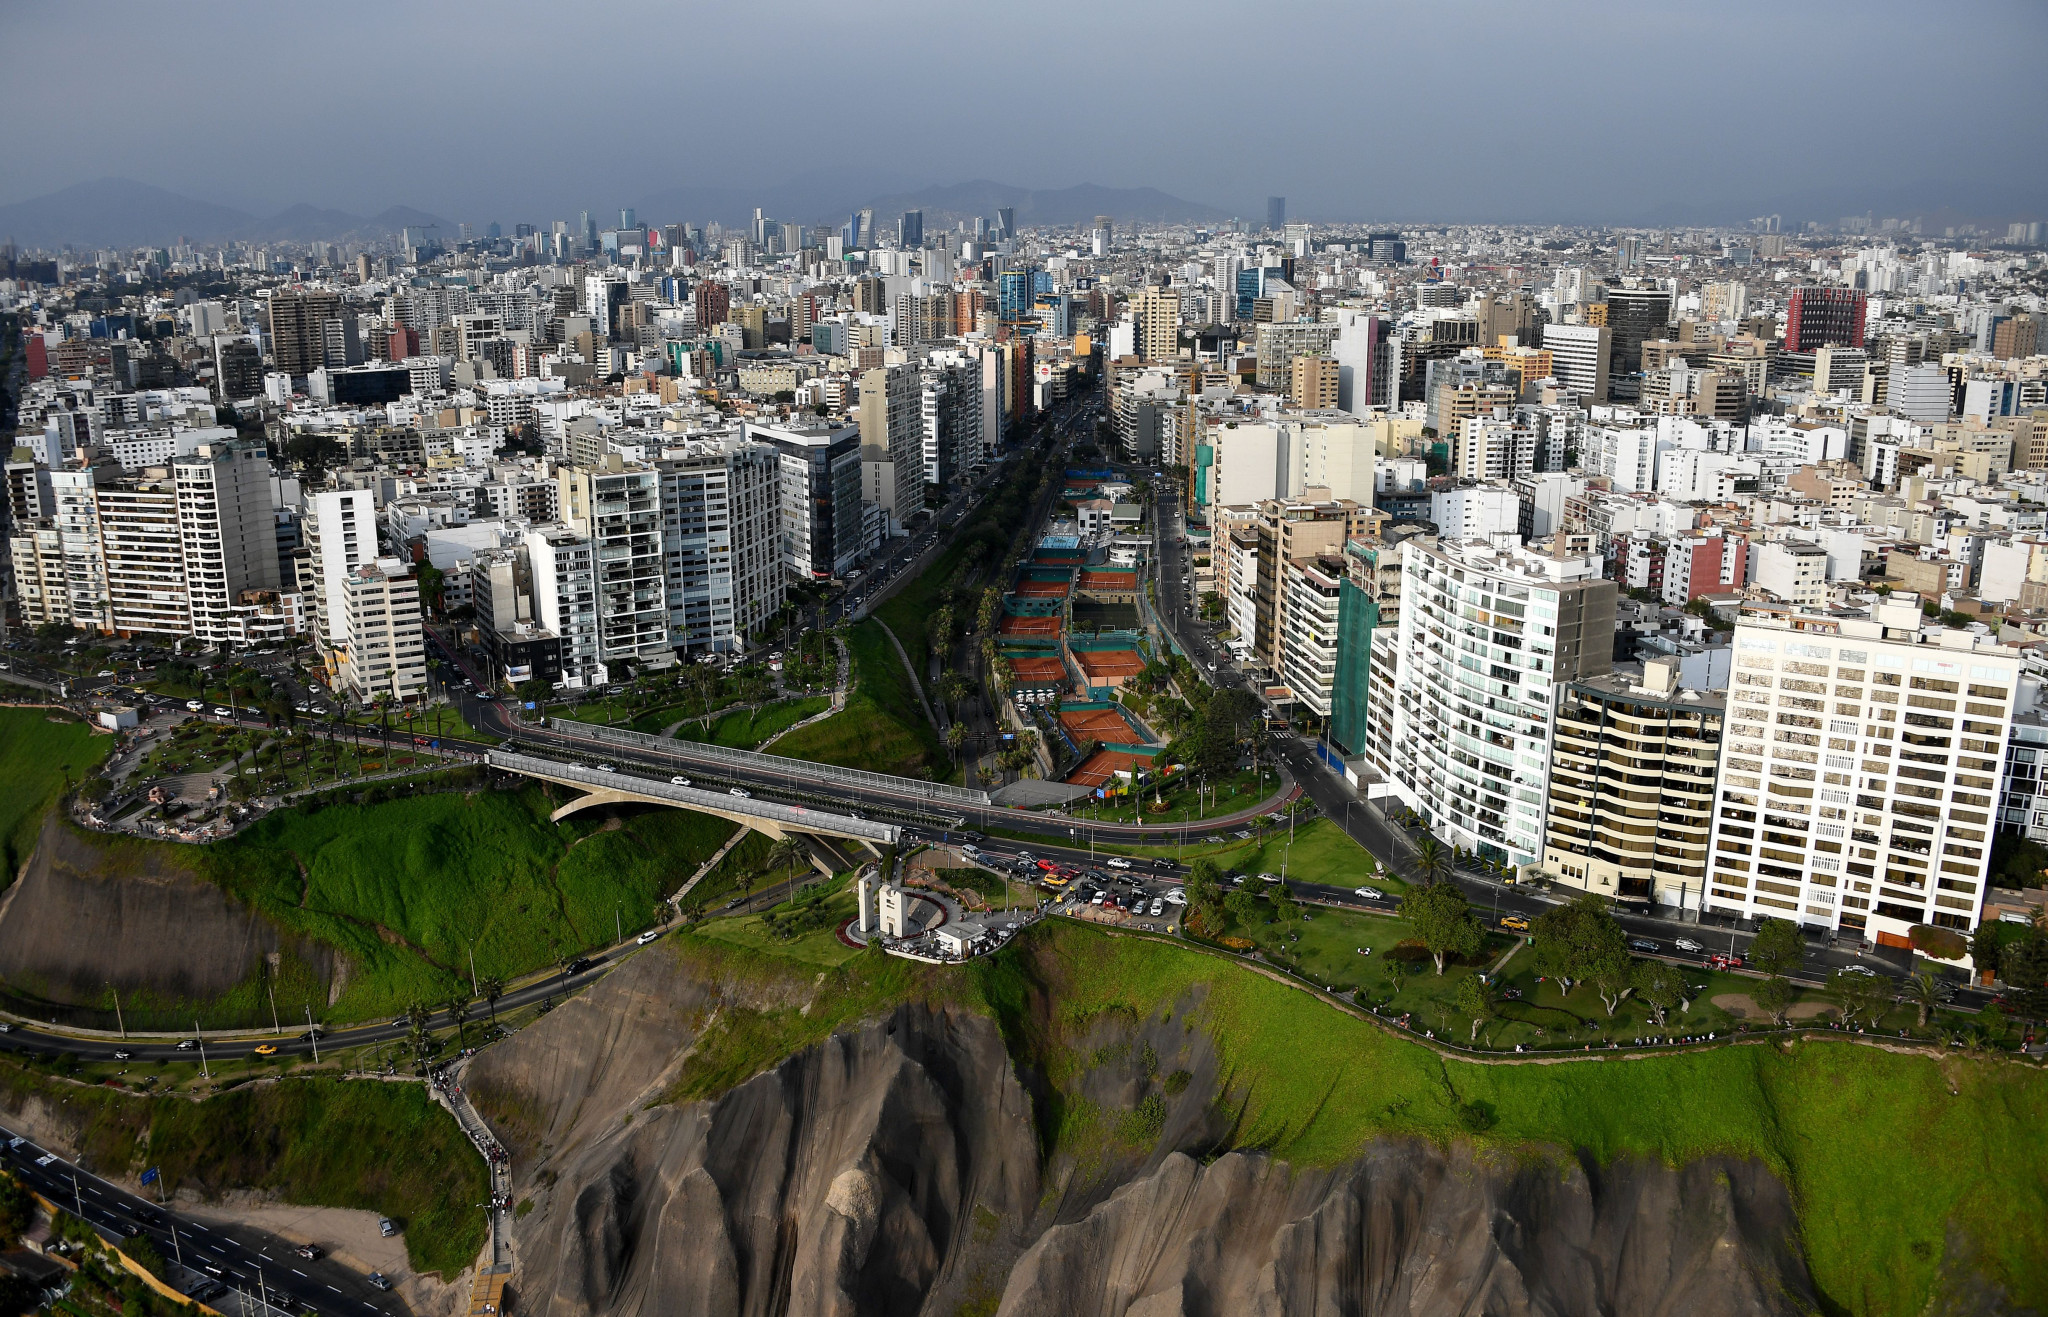 Lima is set to become the first city in the Americas to stage the WSPS Championships ©Getty Images